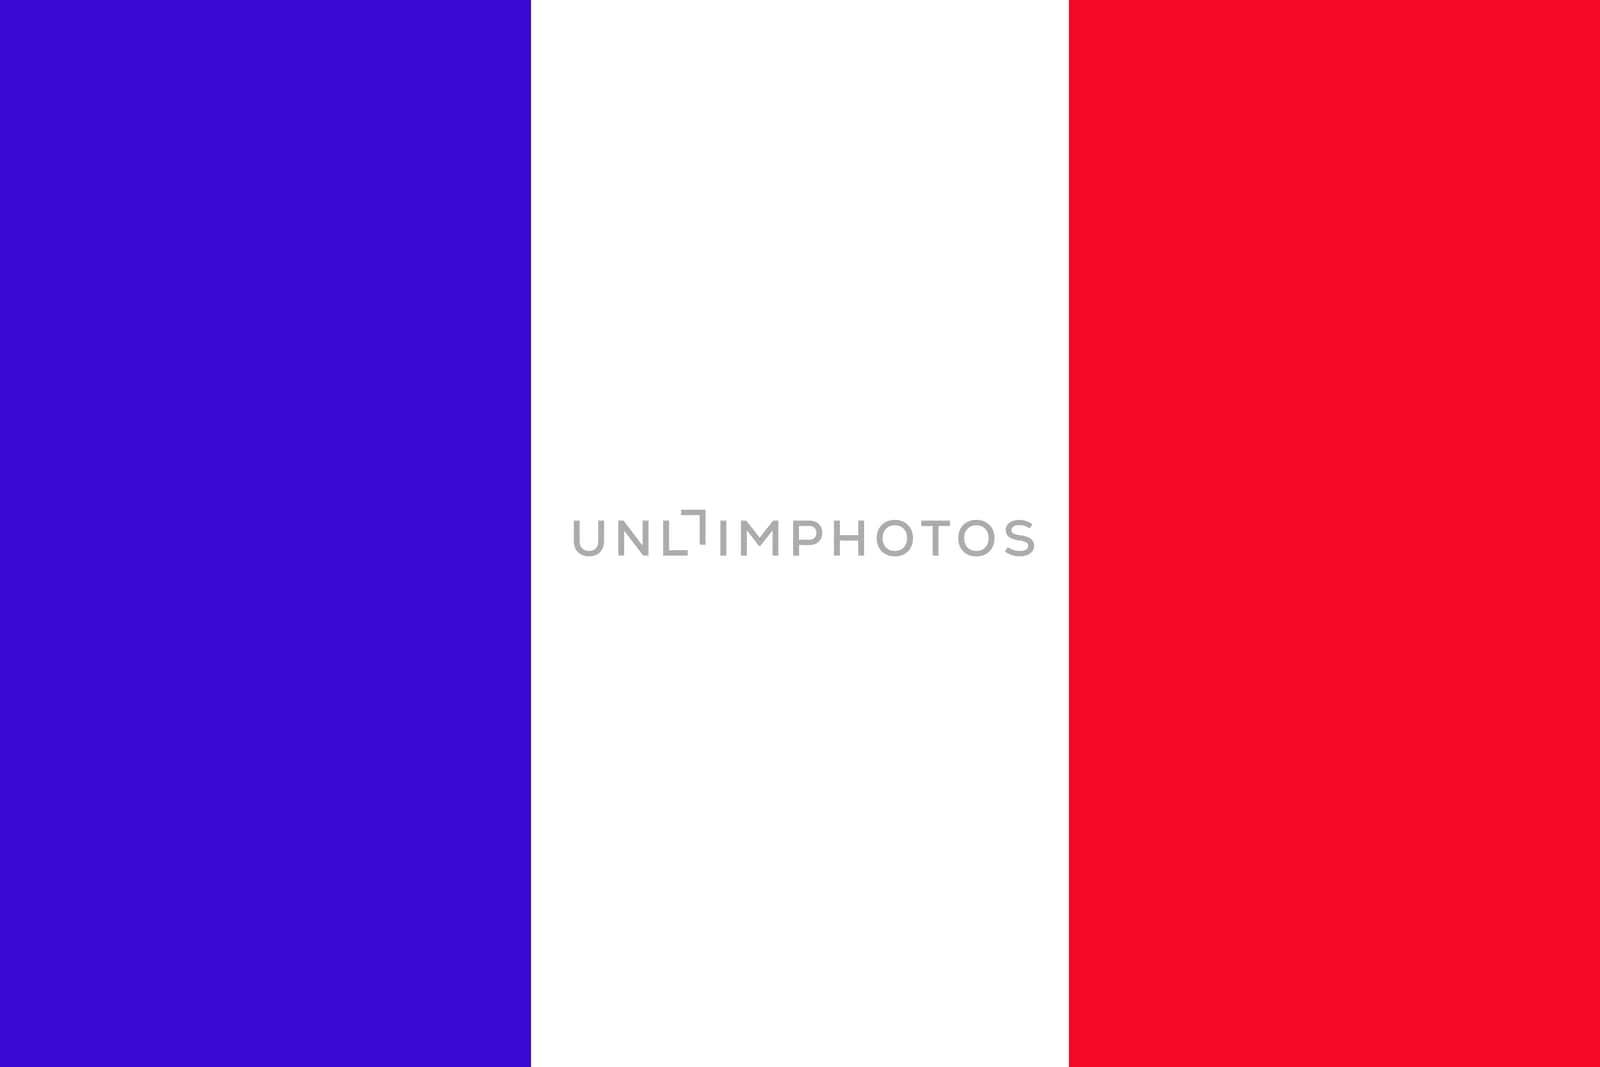 The blue and white and red flag of France. by darekb22